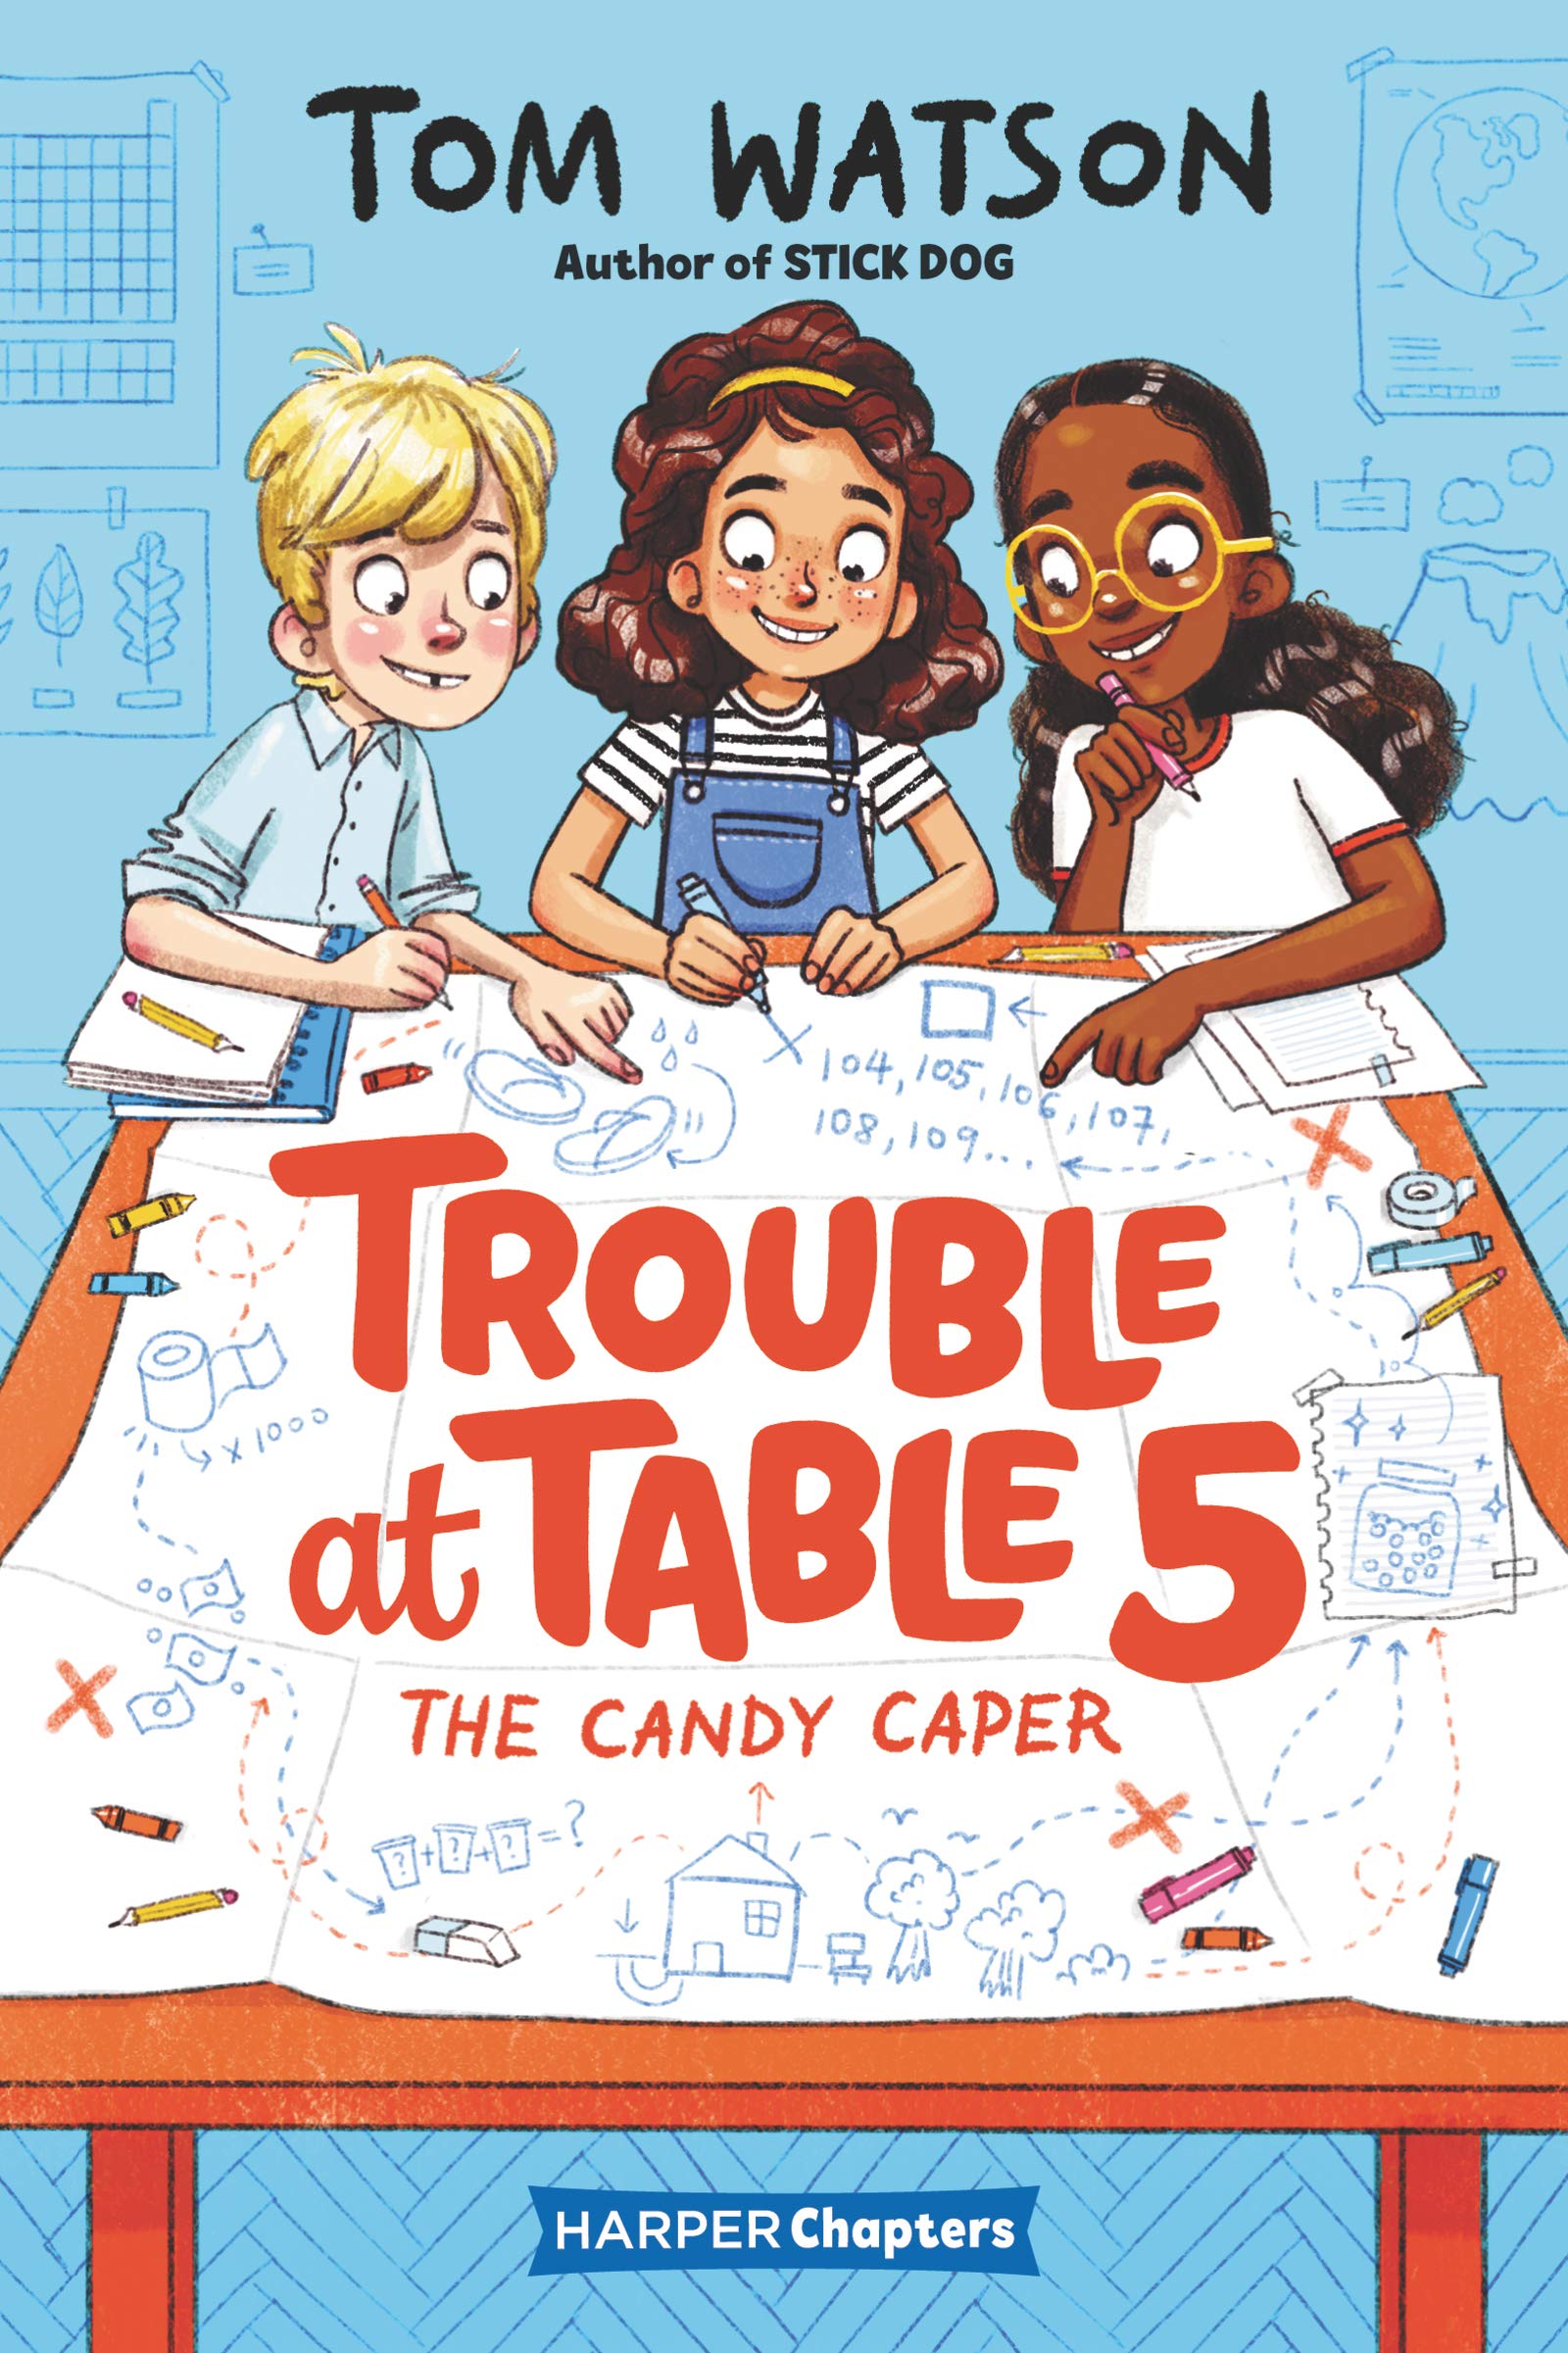 Trouble at Table 5 #1: The Candy Caper (HarperChapters)